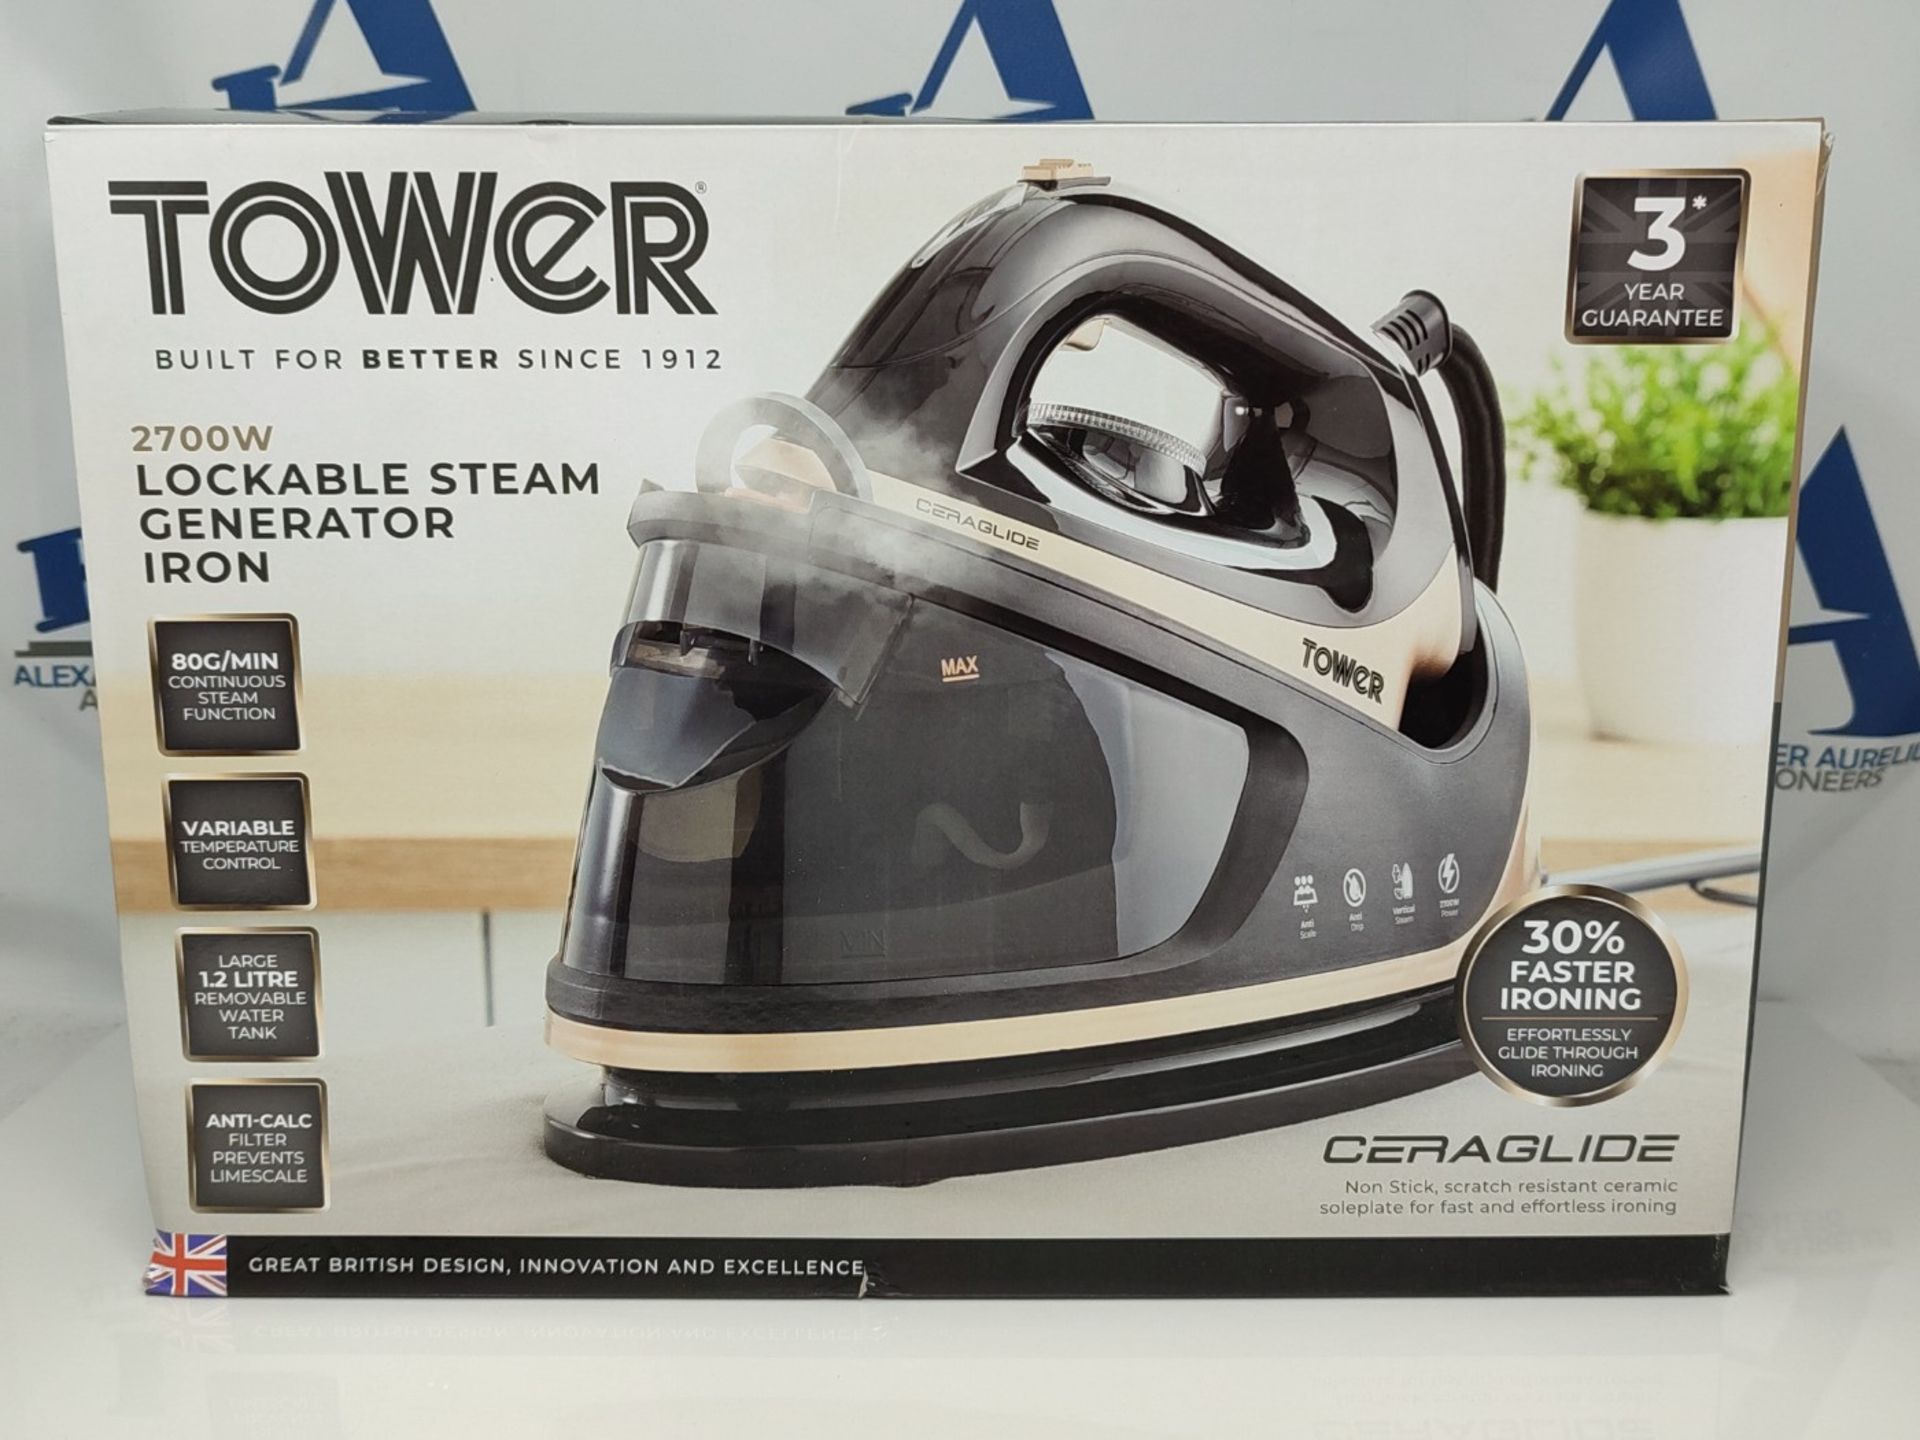 RRP £53.00 Tower T22024GLD Ceraglide Steam Generator, 4.5 Bar Pressure, 135g/min Continuous Steam - Image 2 of 3